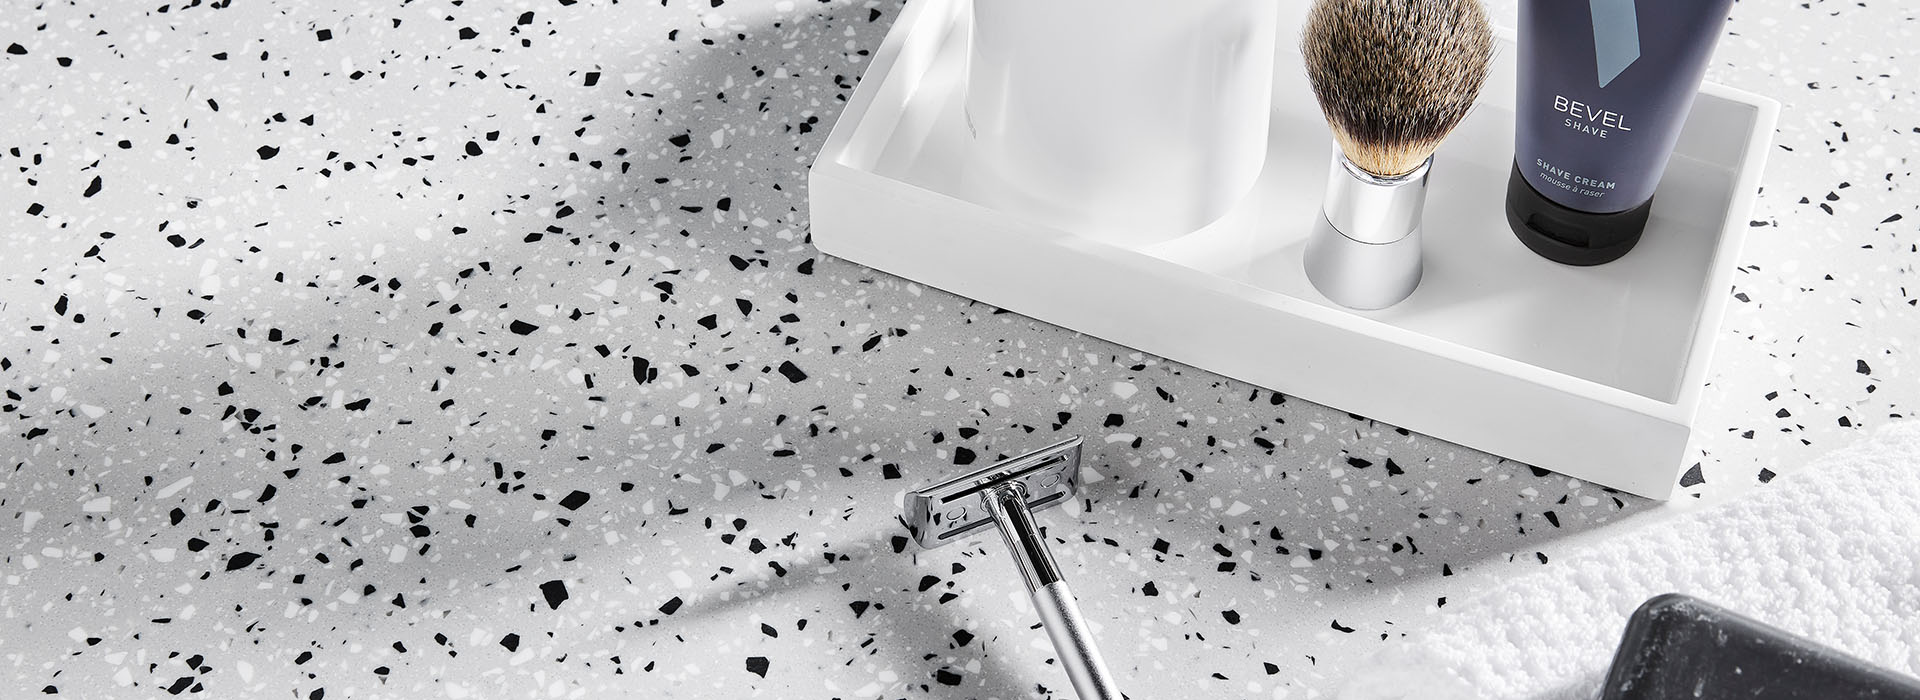 410 Argento Terrazzo Matrix solid surface bathroom sink counter with razor and soap dish